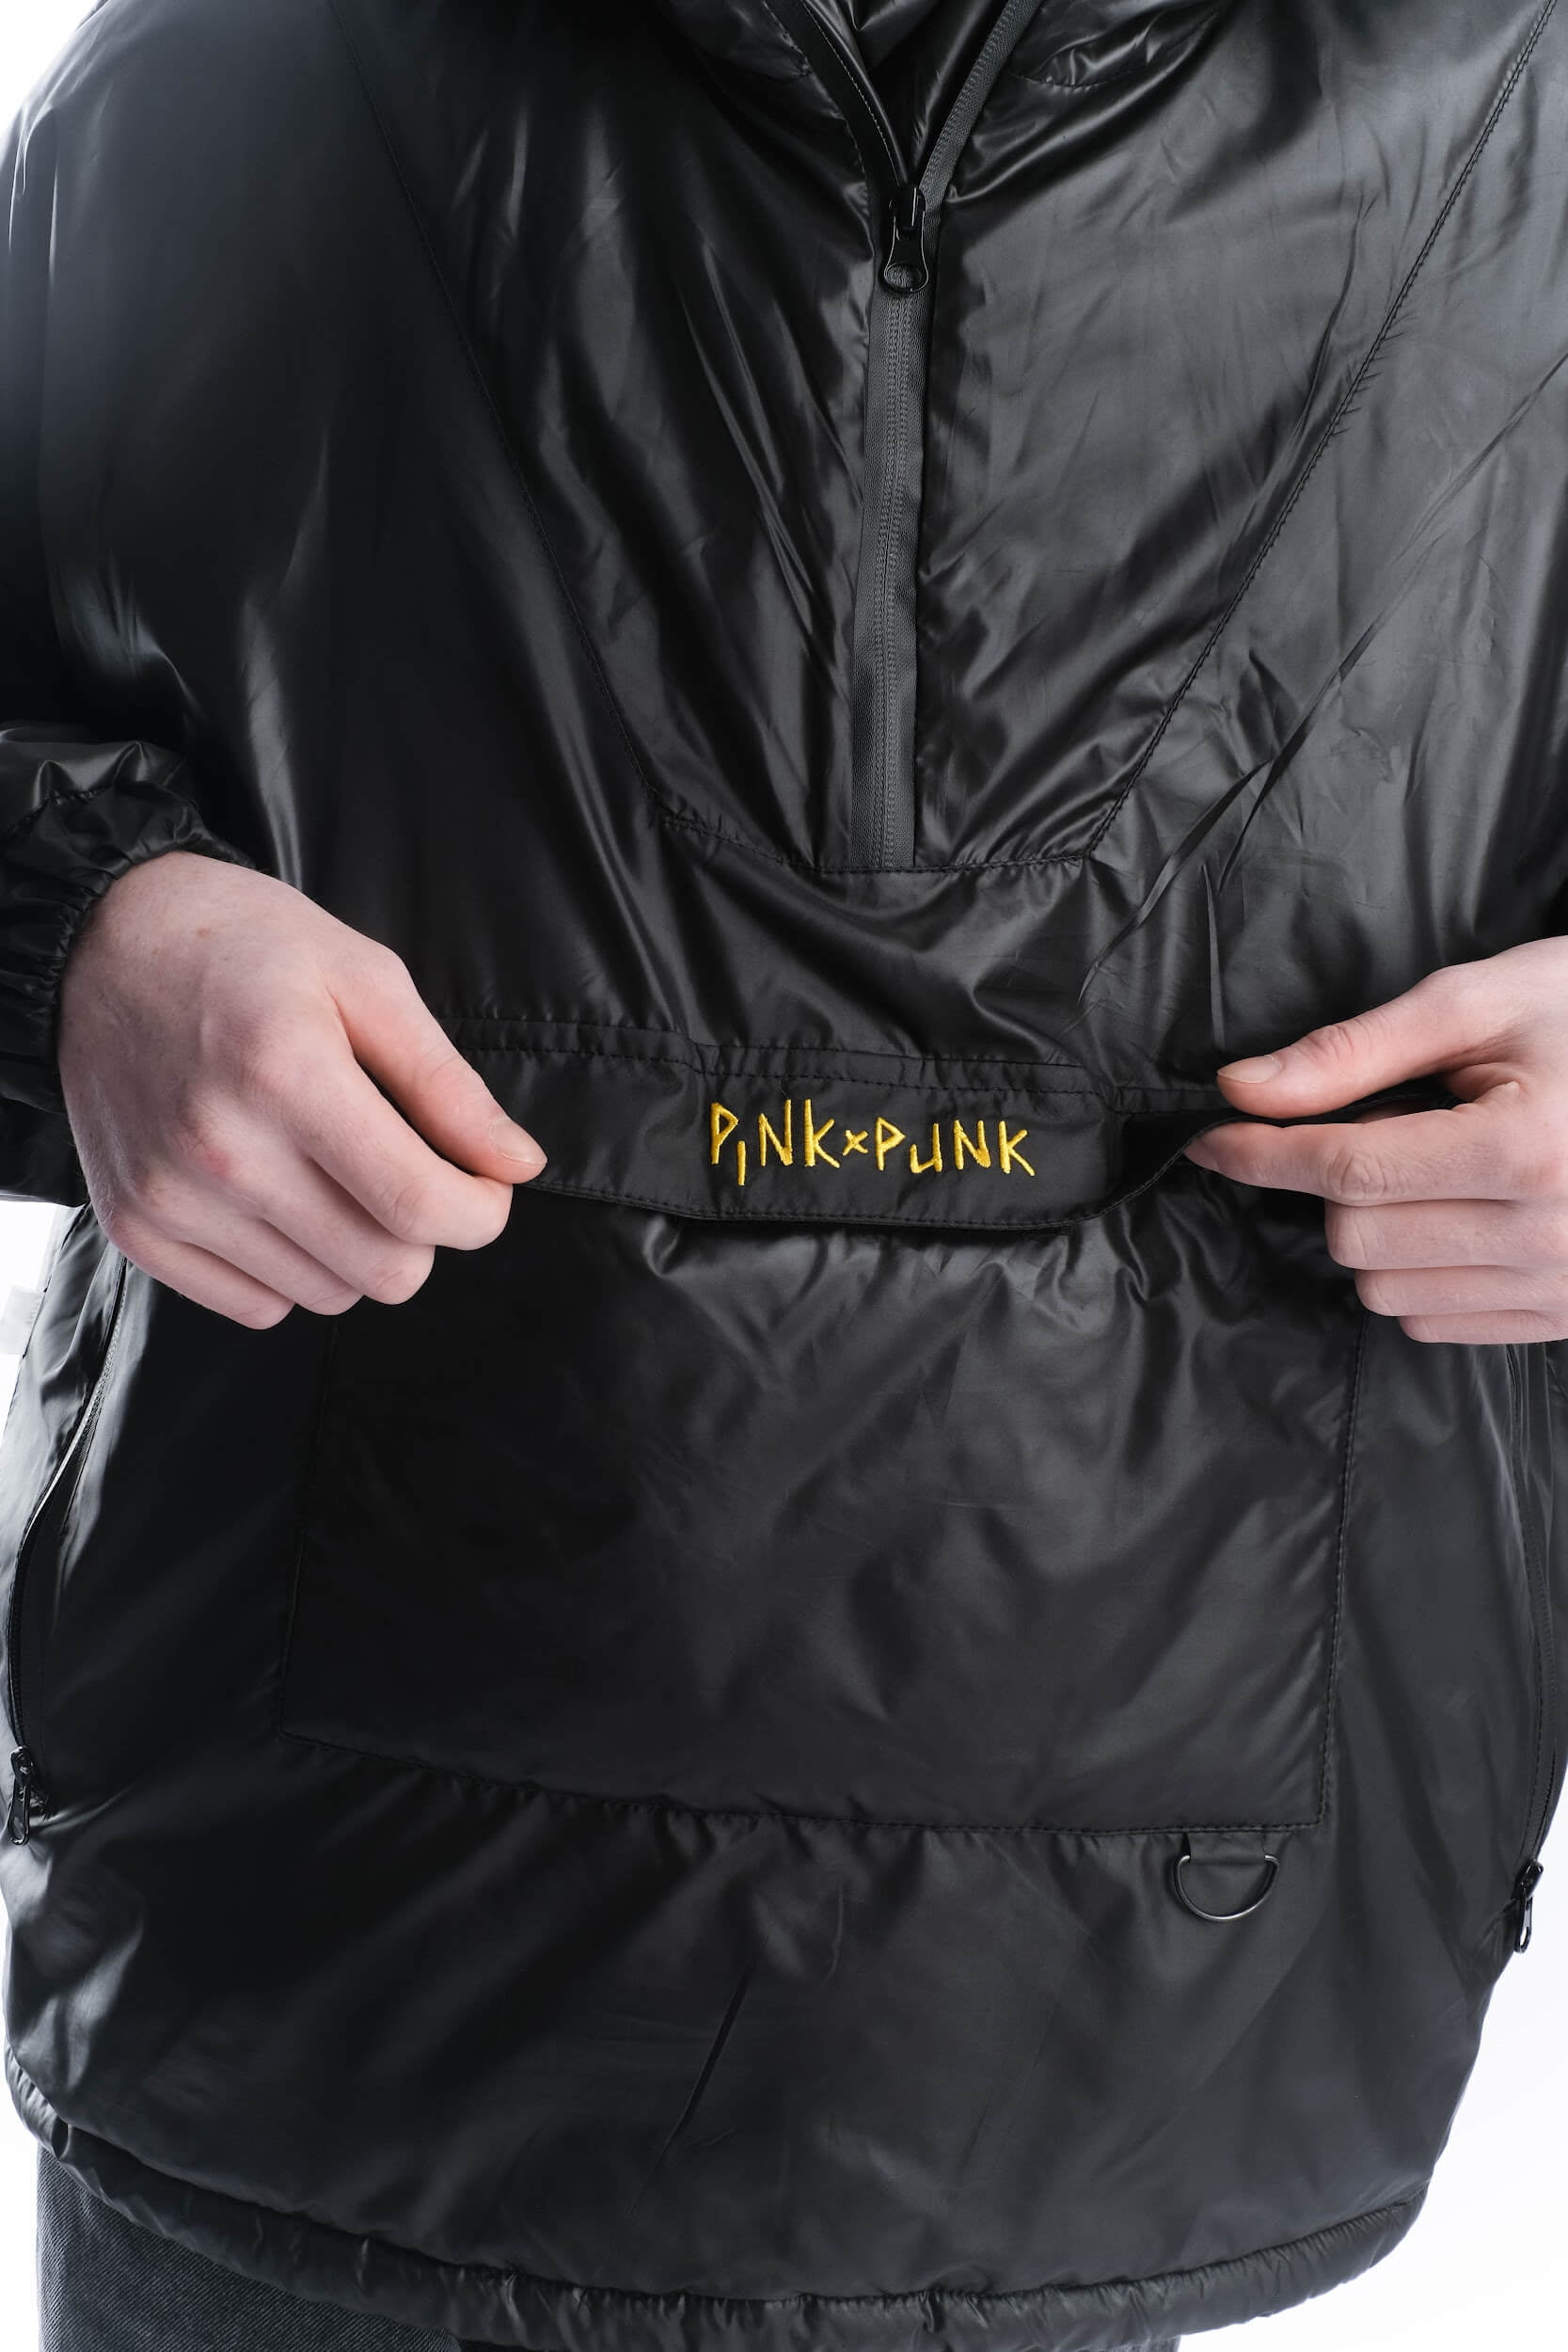 <p>This is a must-have garment for windy or rainy weather. If you love traveling to windy countries, then you can't do without this anorak.</p><p>Composition:</p><p>Outer material: 100% polyester</p><p>Lining: 45% cotton, 55% polyester</p>